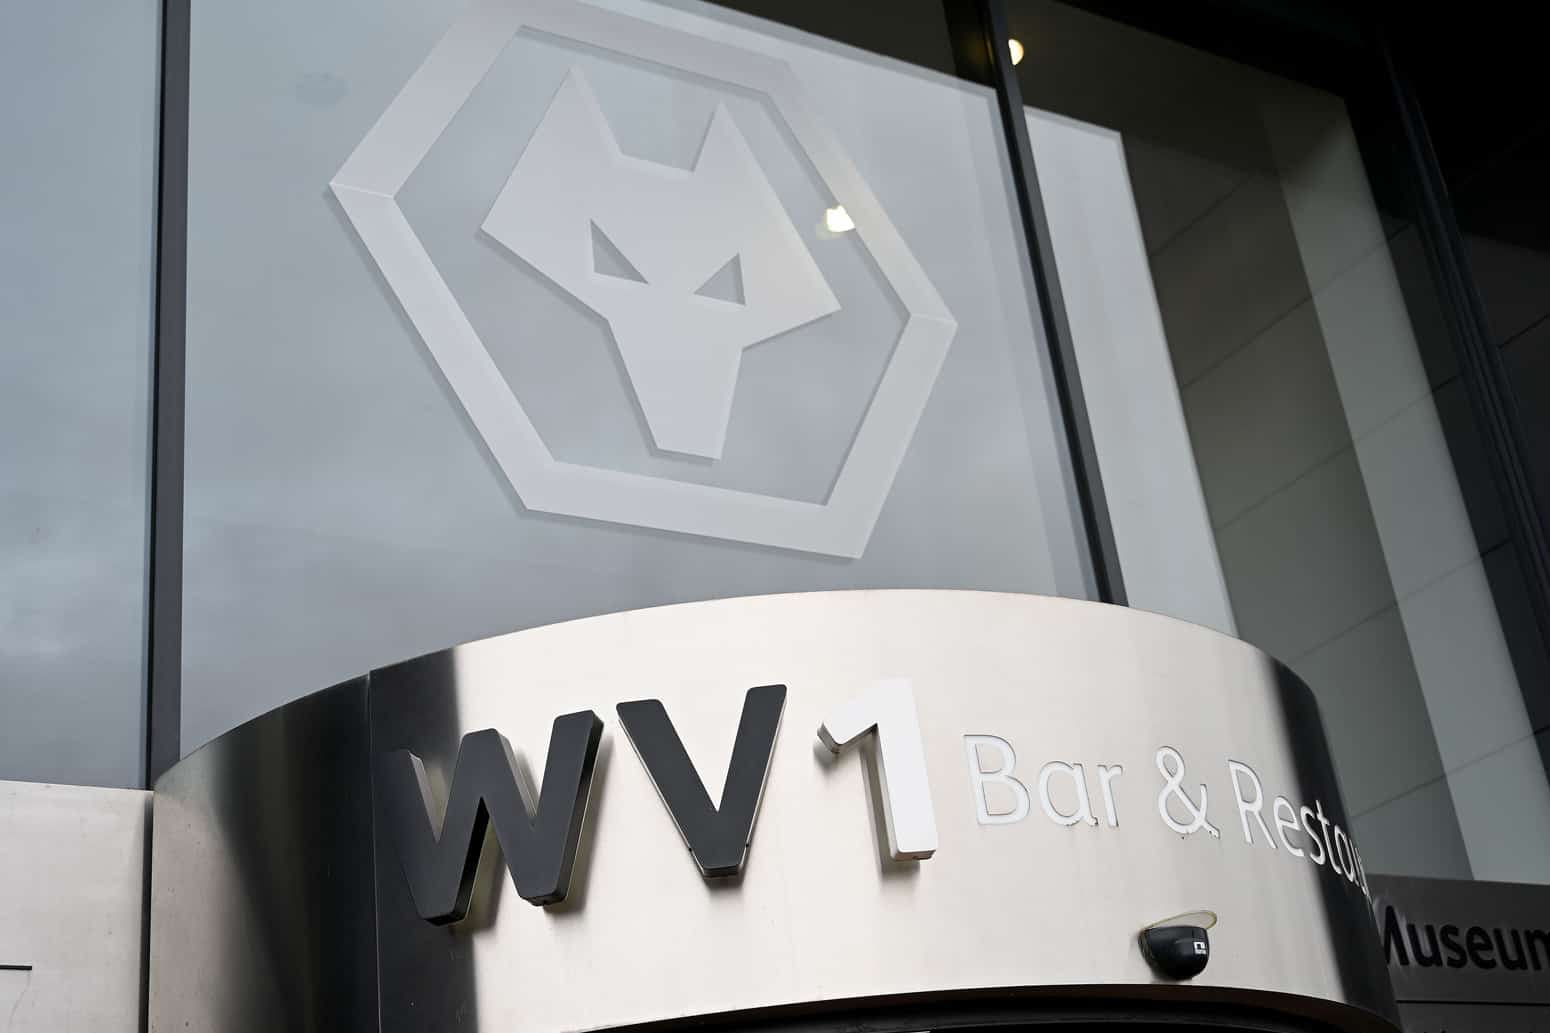 Entrance to WV1 at Molineux